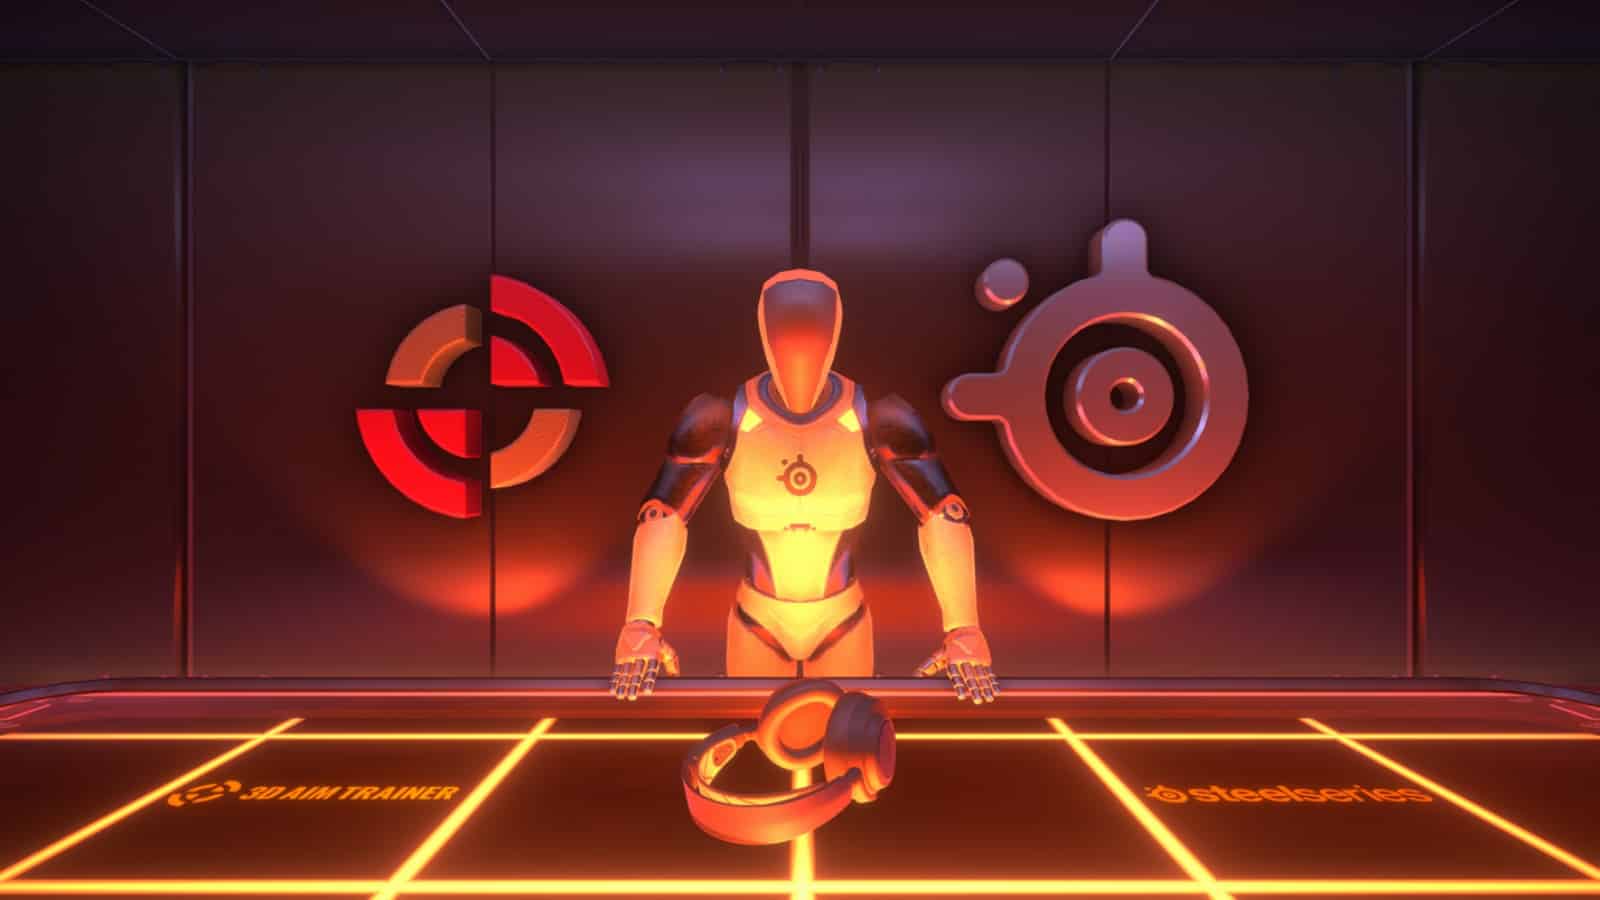 A render of the Aim Trainer on a grid background with the Steelseries and 3D Aim Trainer logos